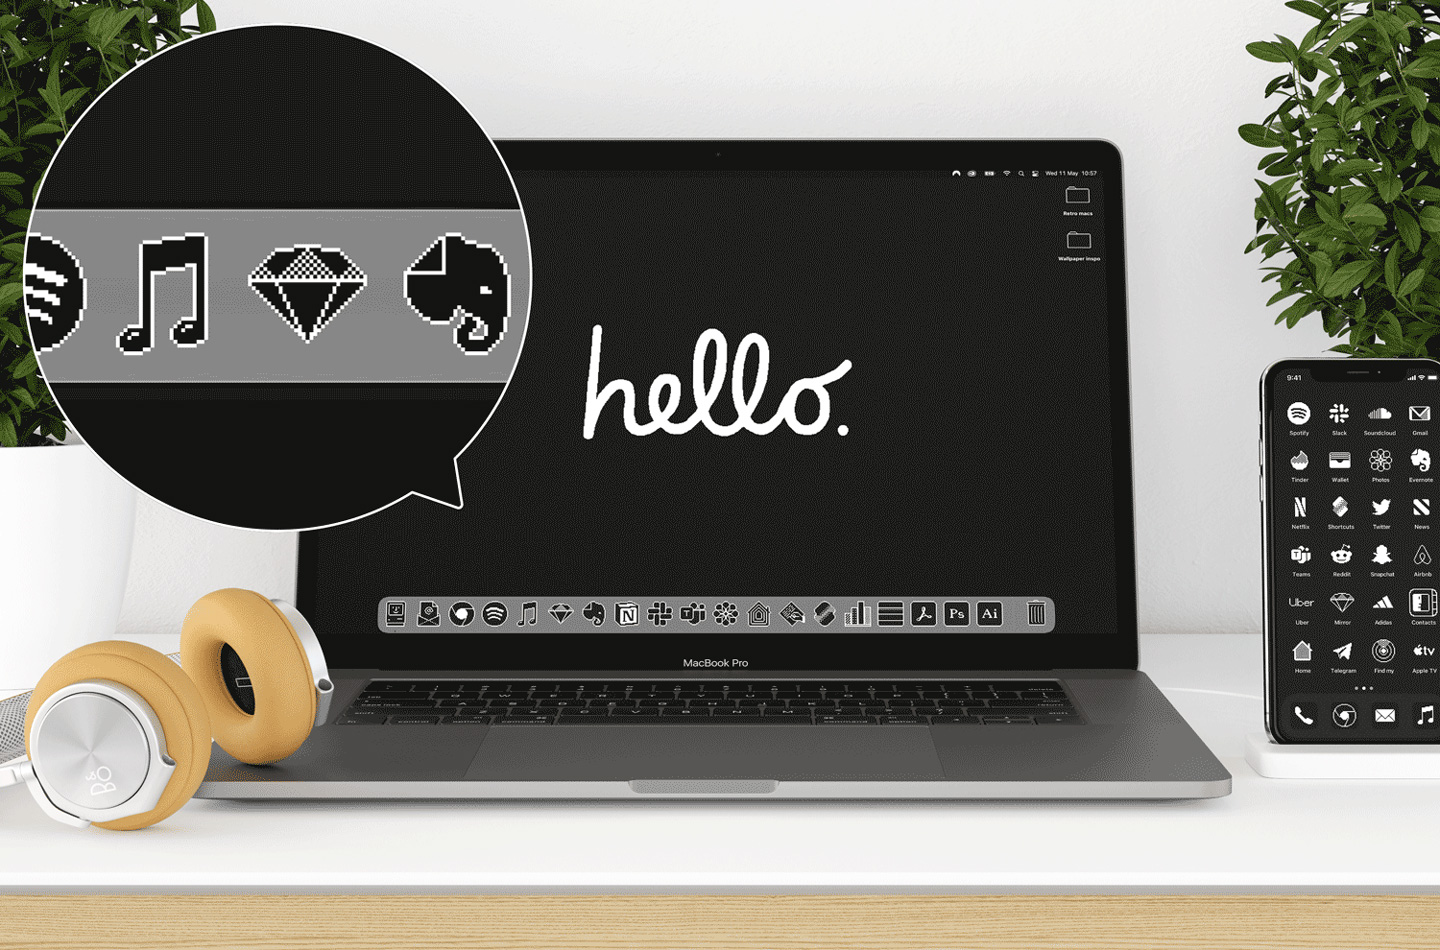 #Retro Macintosh Theme with icons gives your MacBook a vintage 1984 Apple vibe!